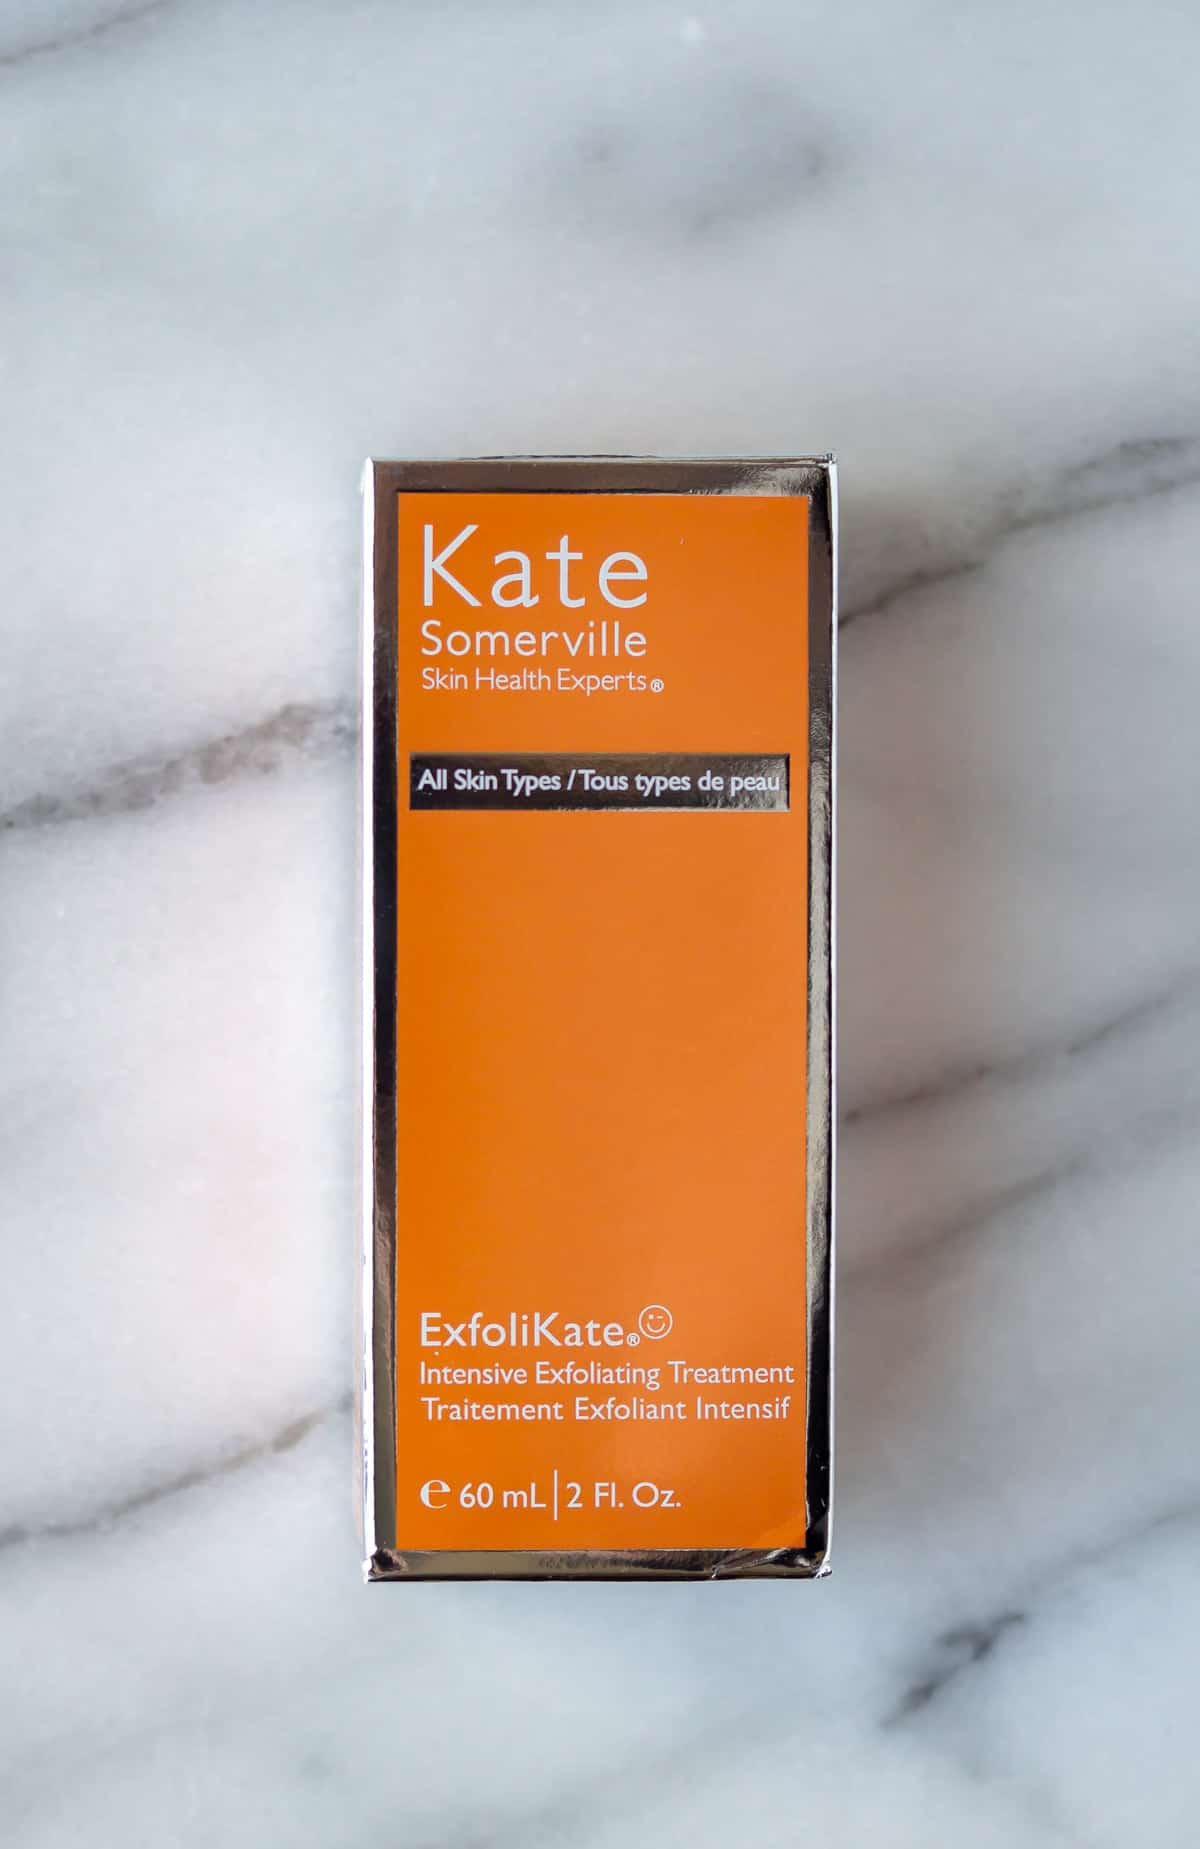 Kate Somerville Exfolikate box on a marble background.